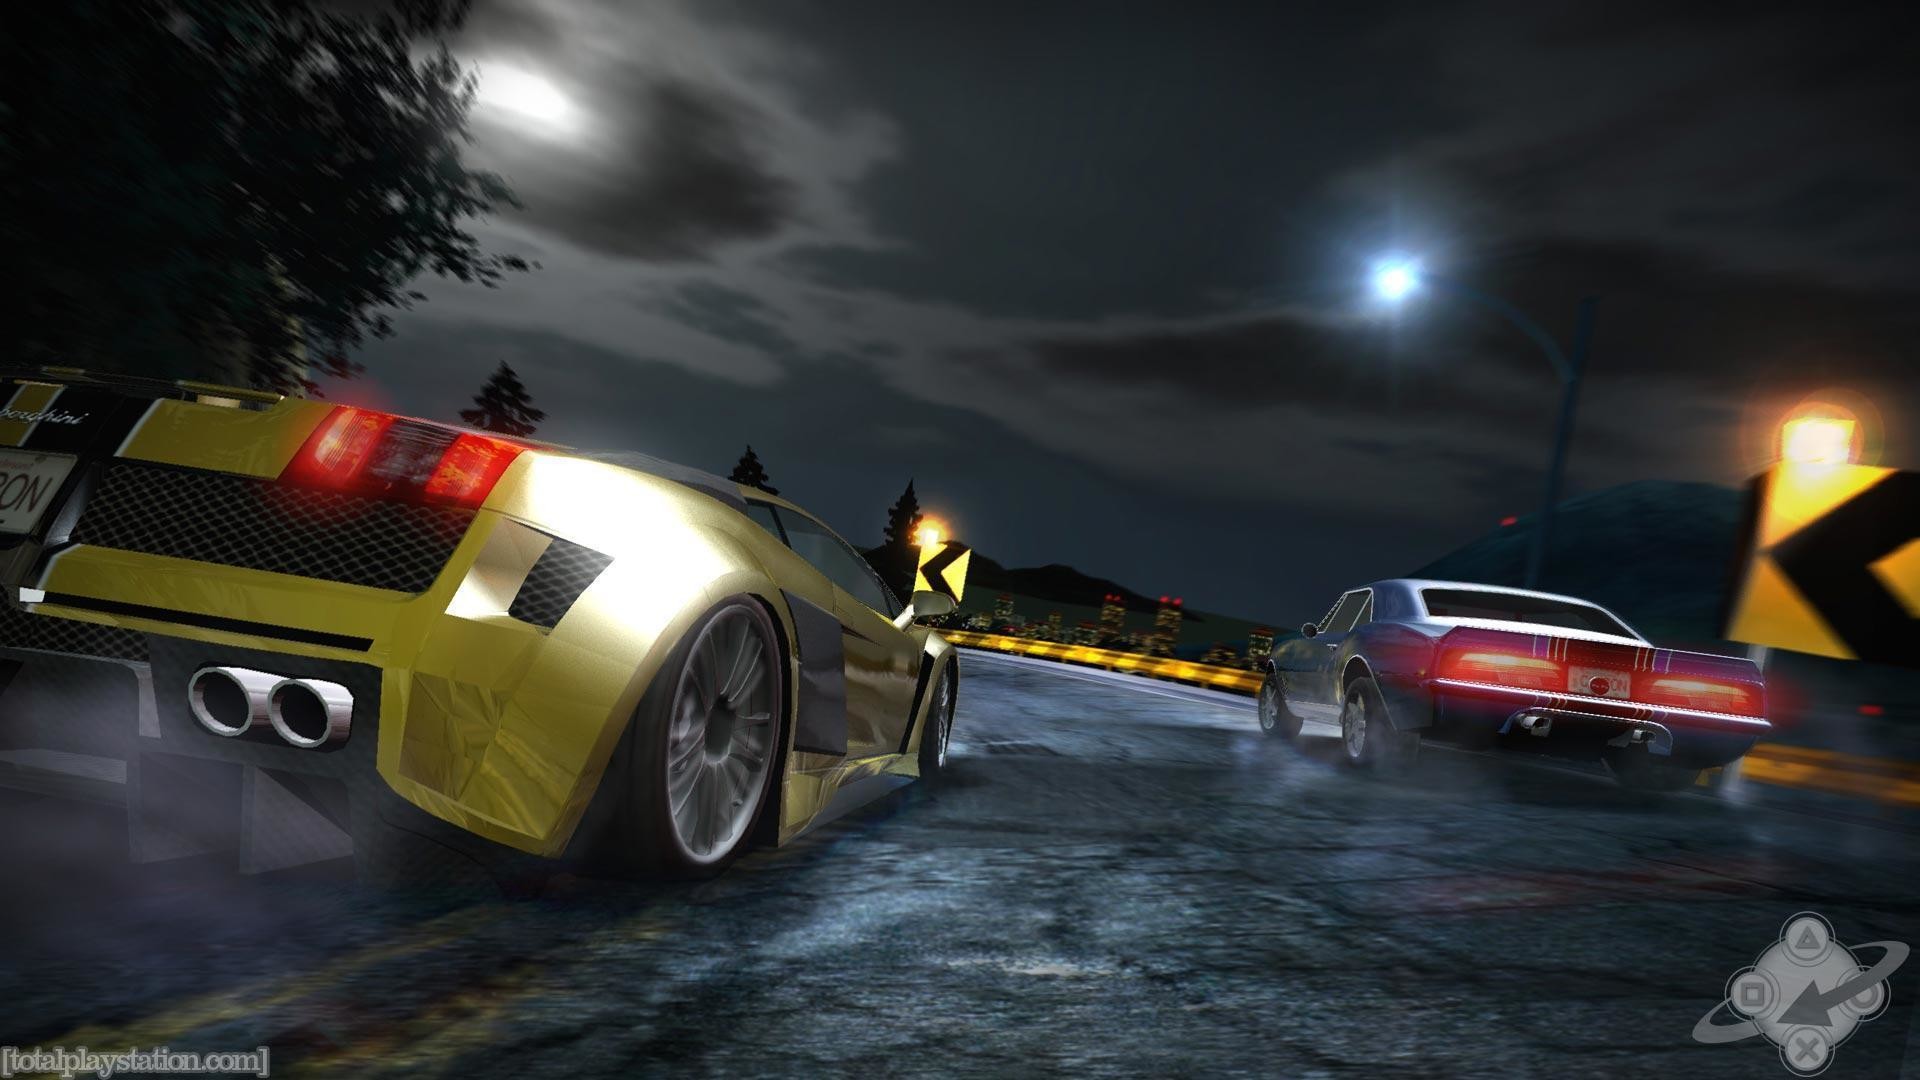 1920x1080 Nfs Carbon Wallpapers Hd Need For Speed Carbon 39445 Nfscarbon 3 .